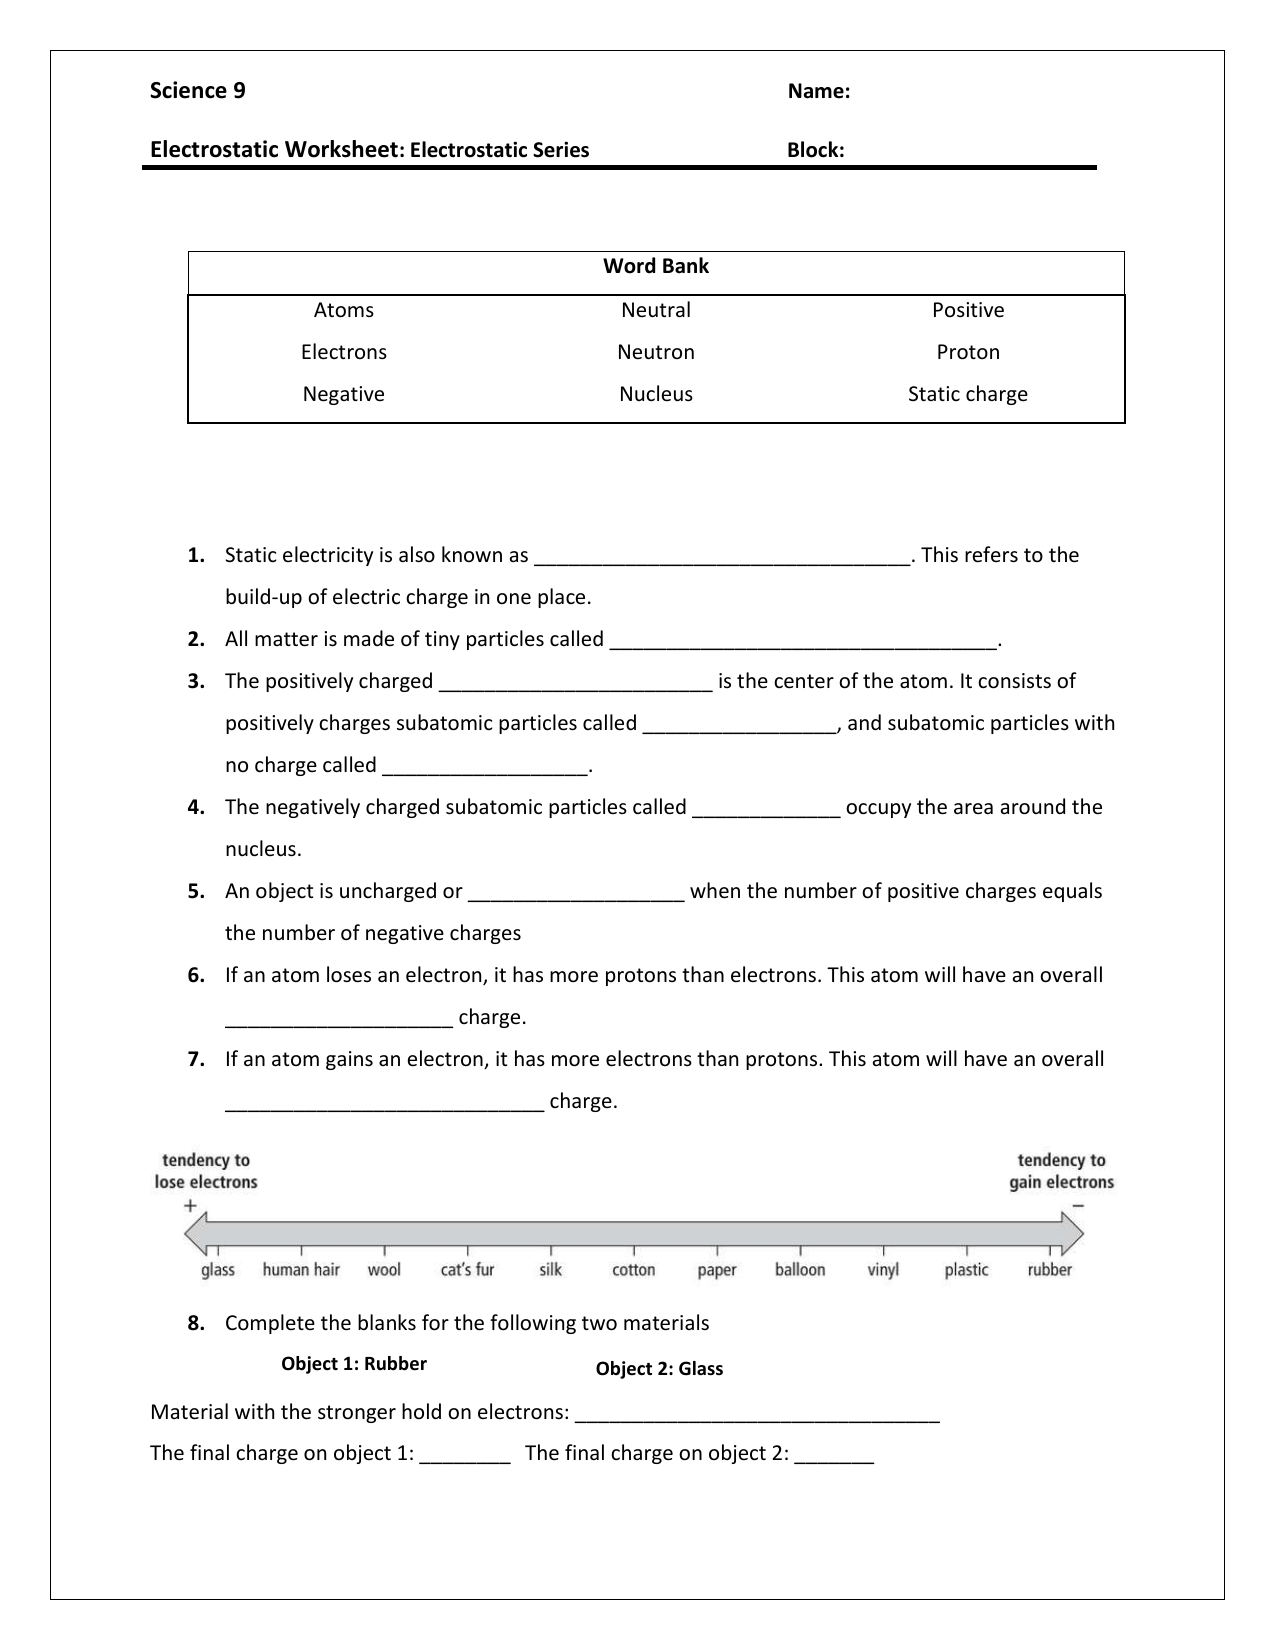 Static Electricity Worksheet For Static Electricity Worksheet Answers